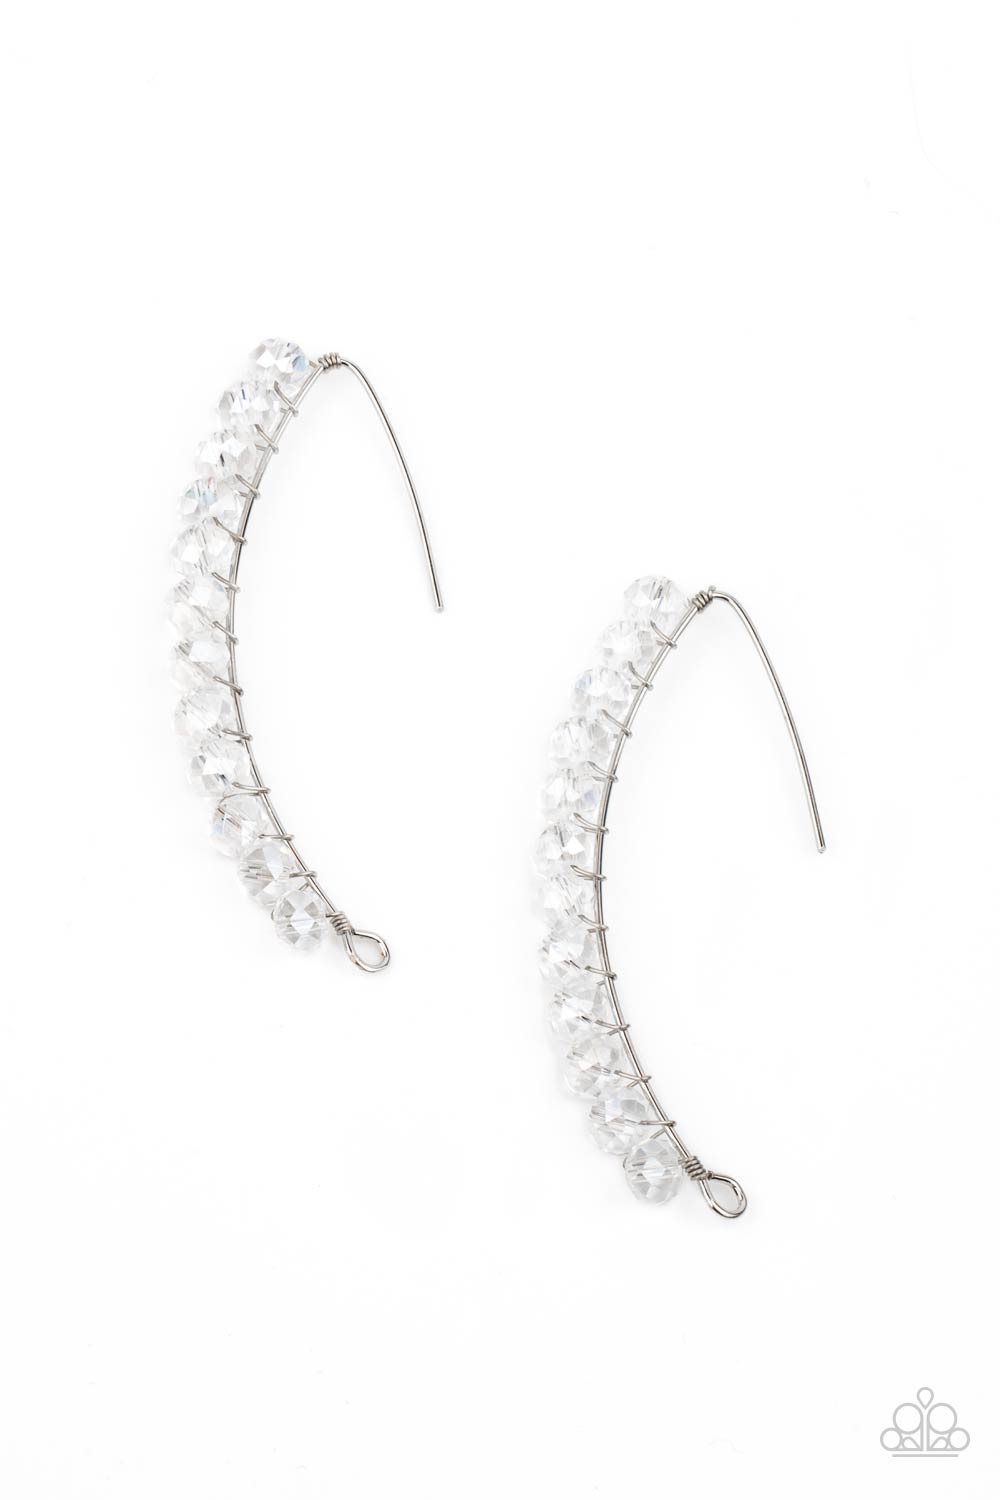 Paparazzi Accessories GLOW Hanging Fruit - White Earrings - Lady T Accessories